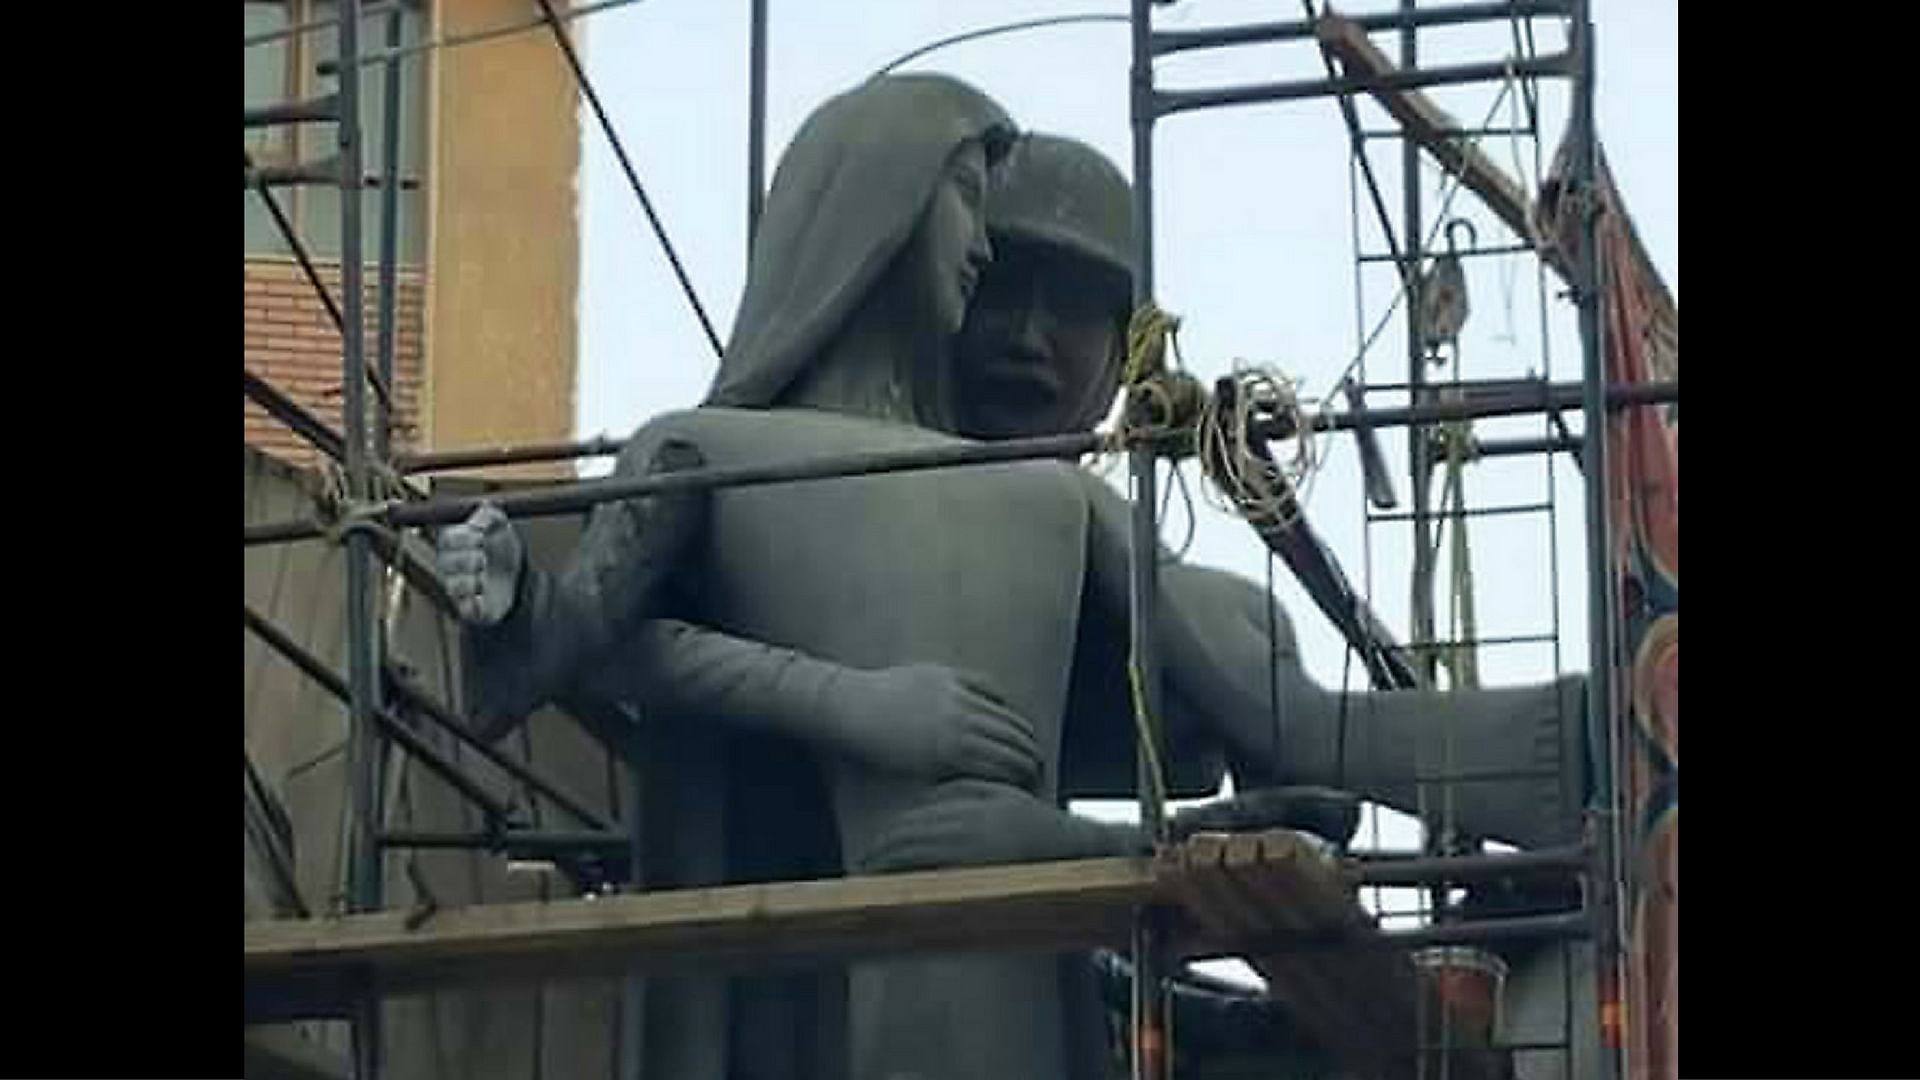 The sculpture which scandalized the locals of the town. (Photo: AP)